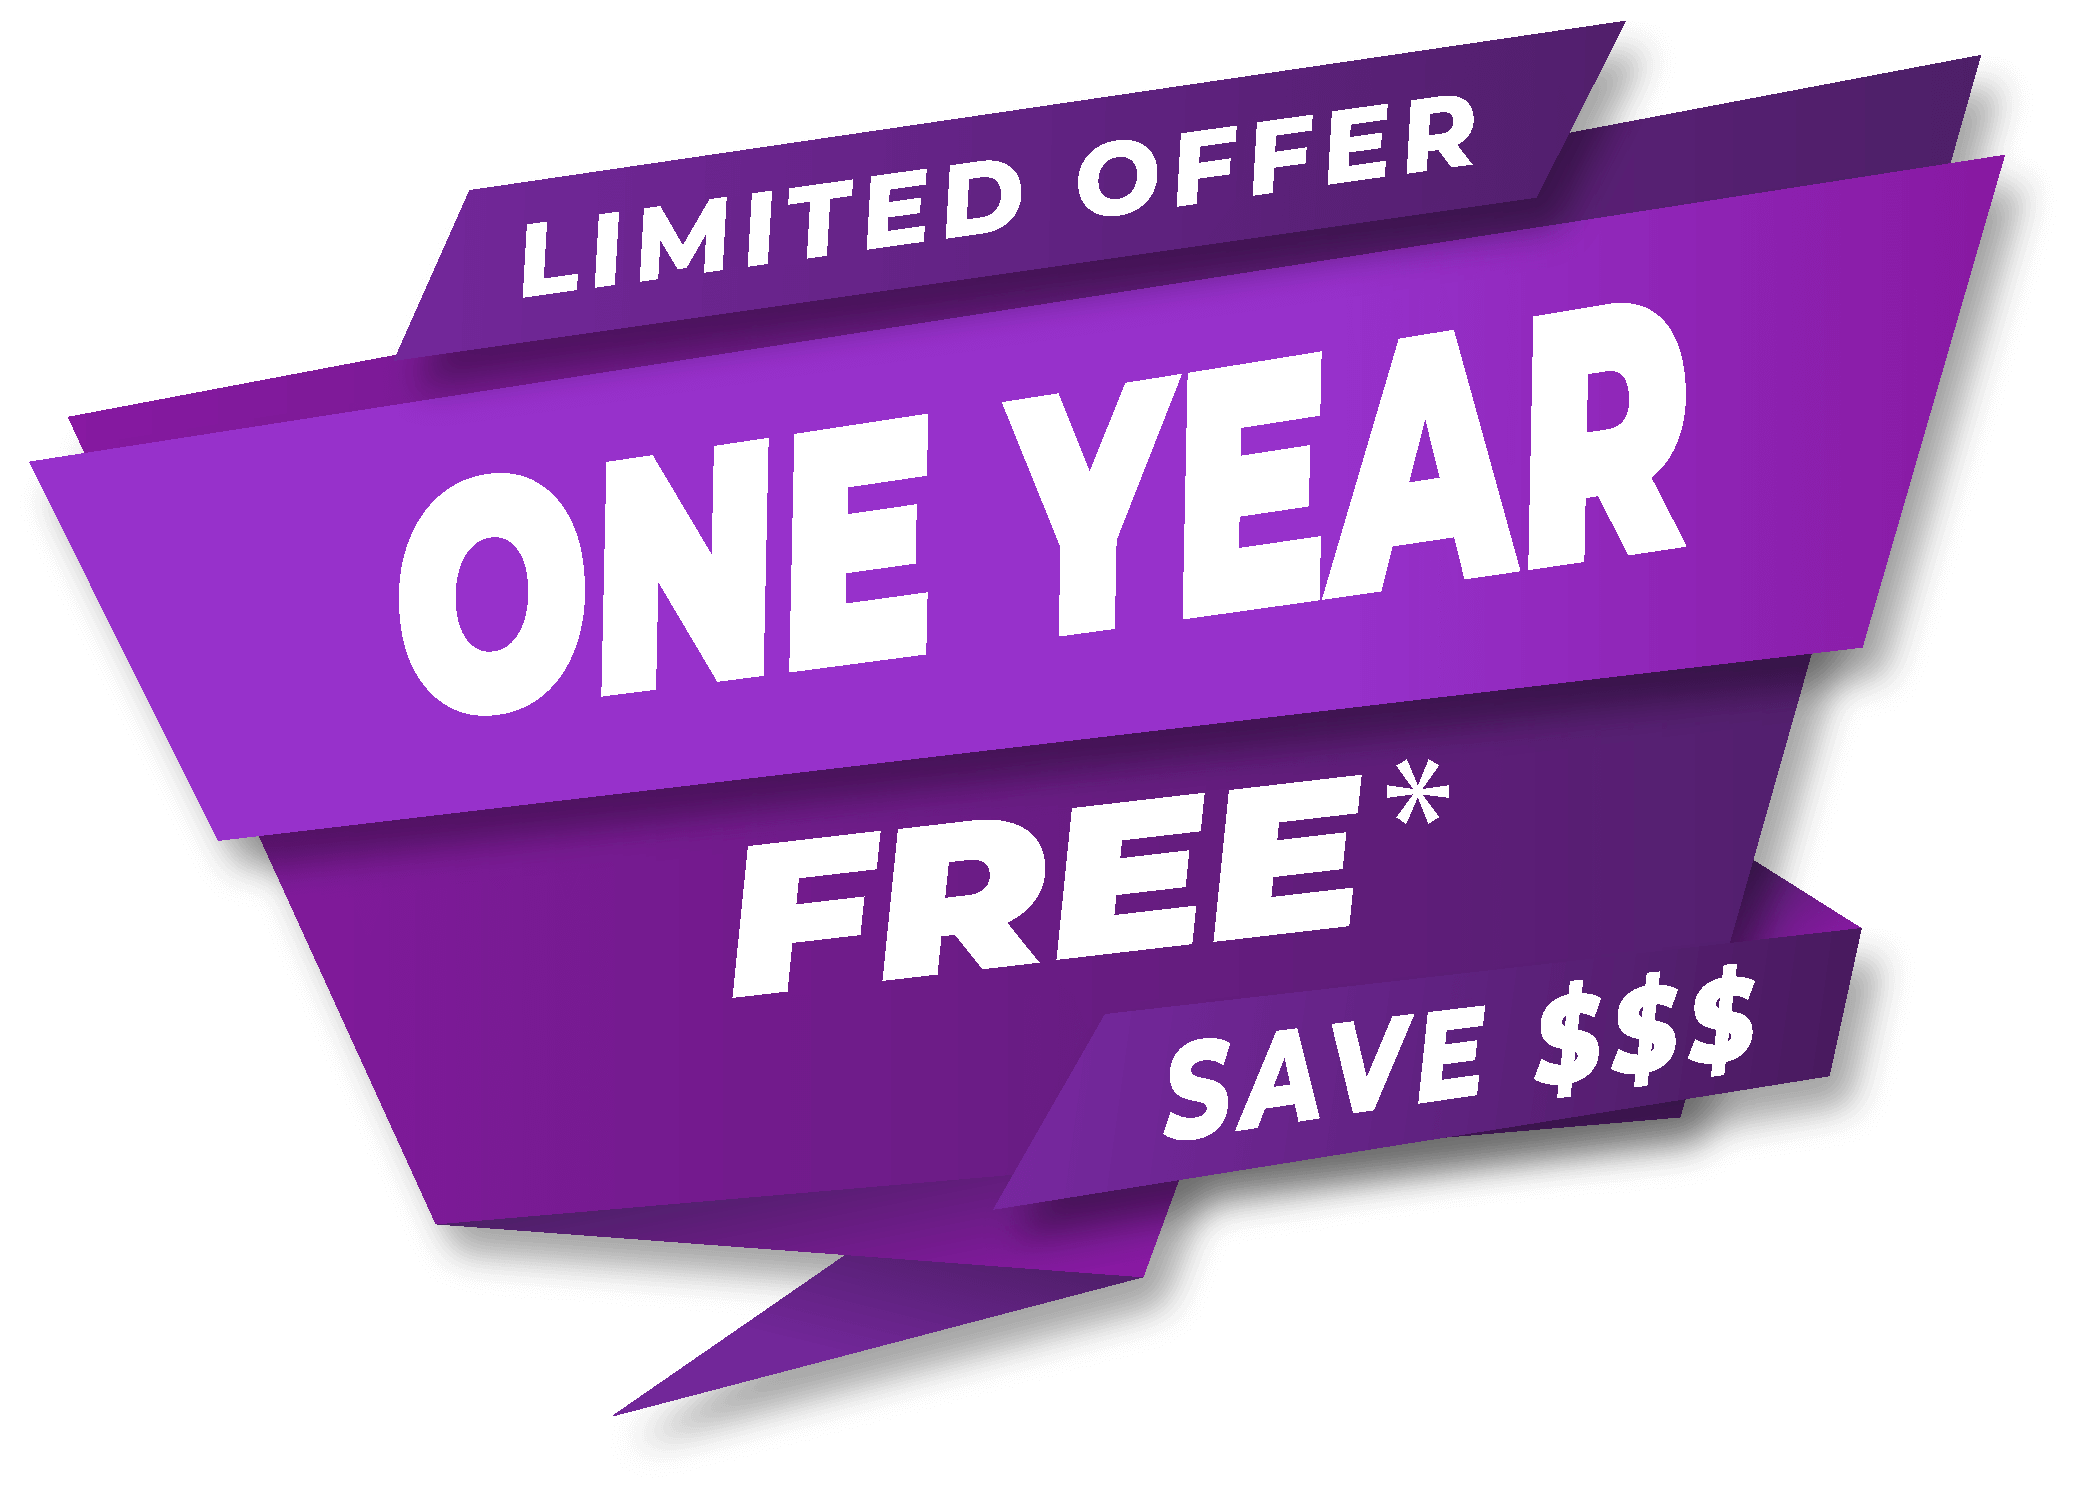 Pay for 2 years and get 1 year free